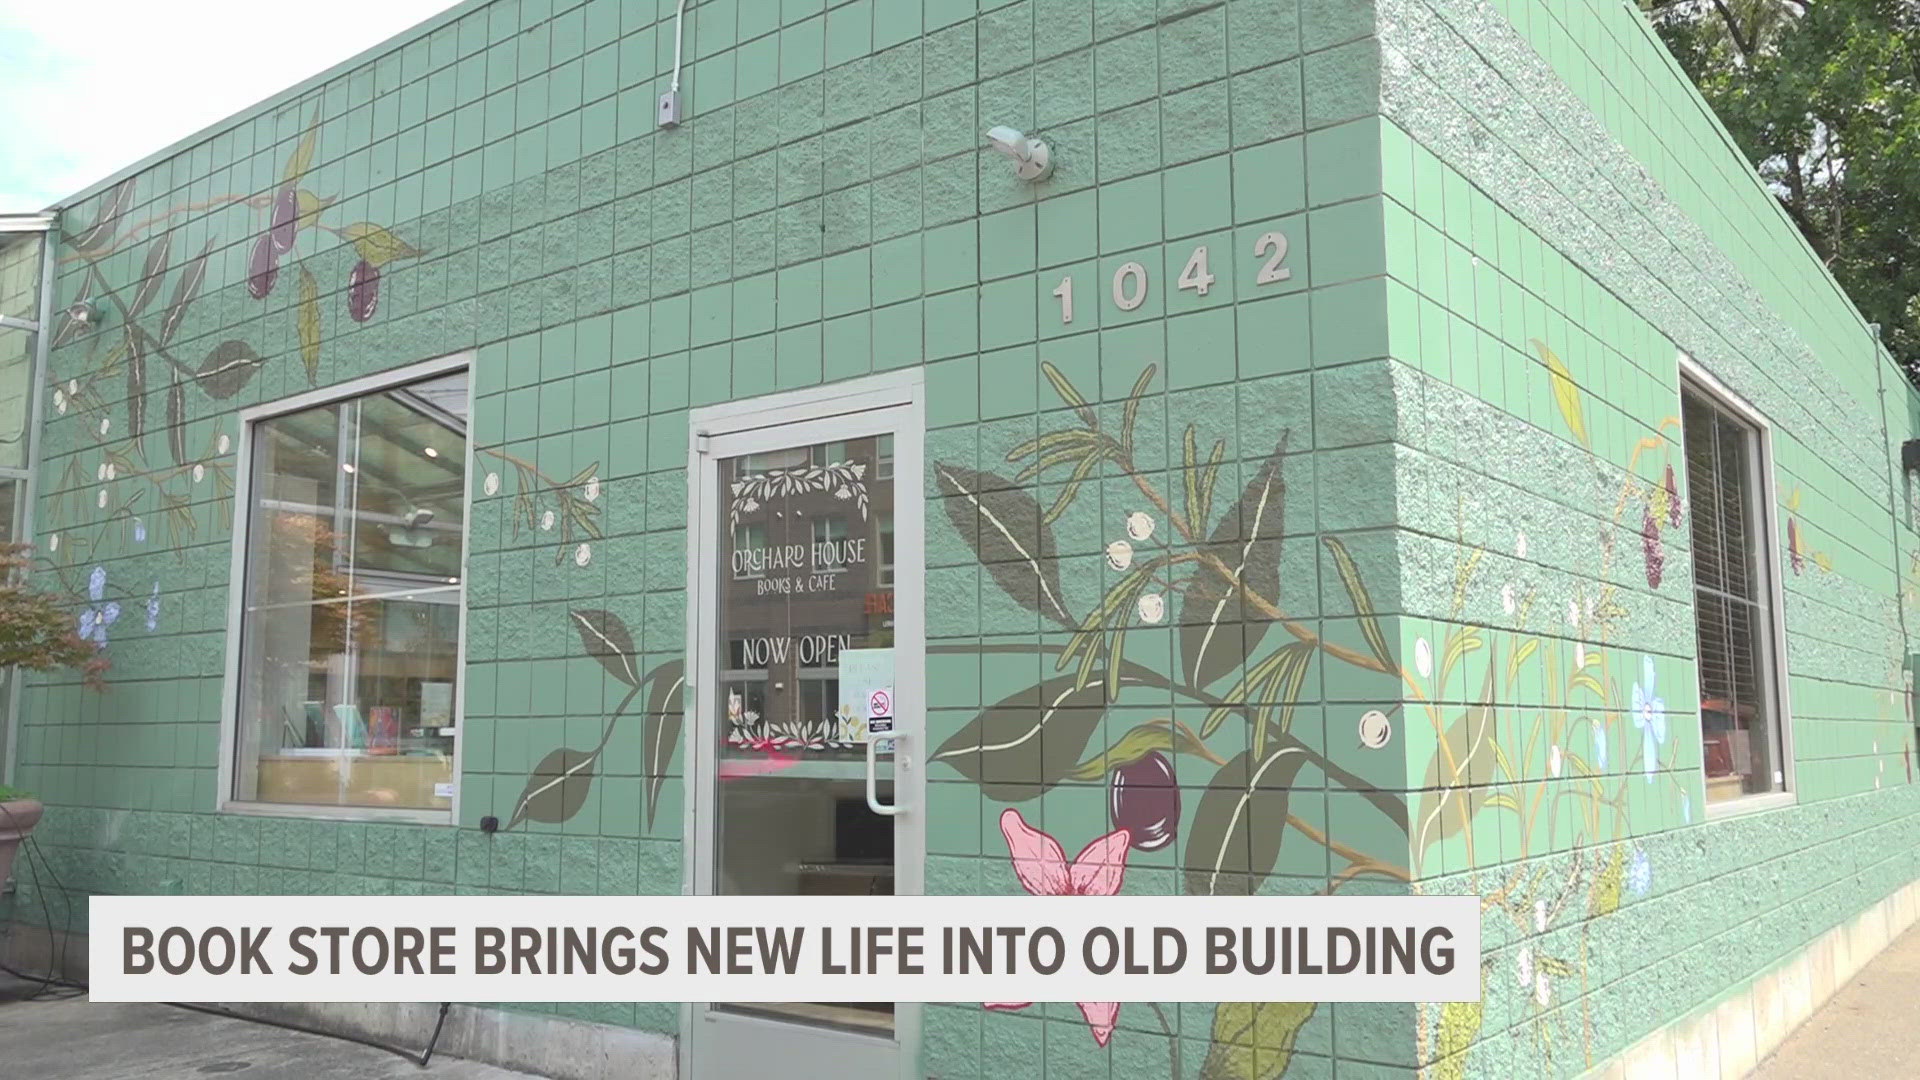 Book store brings new life into old building.